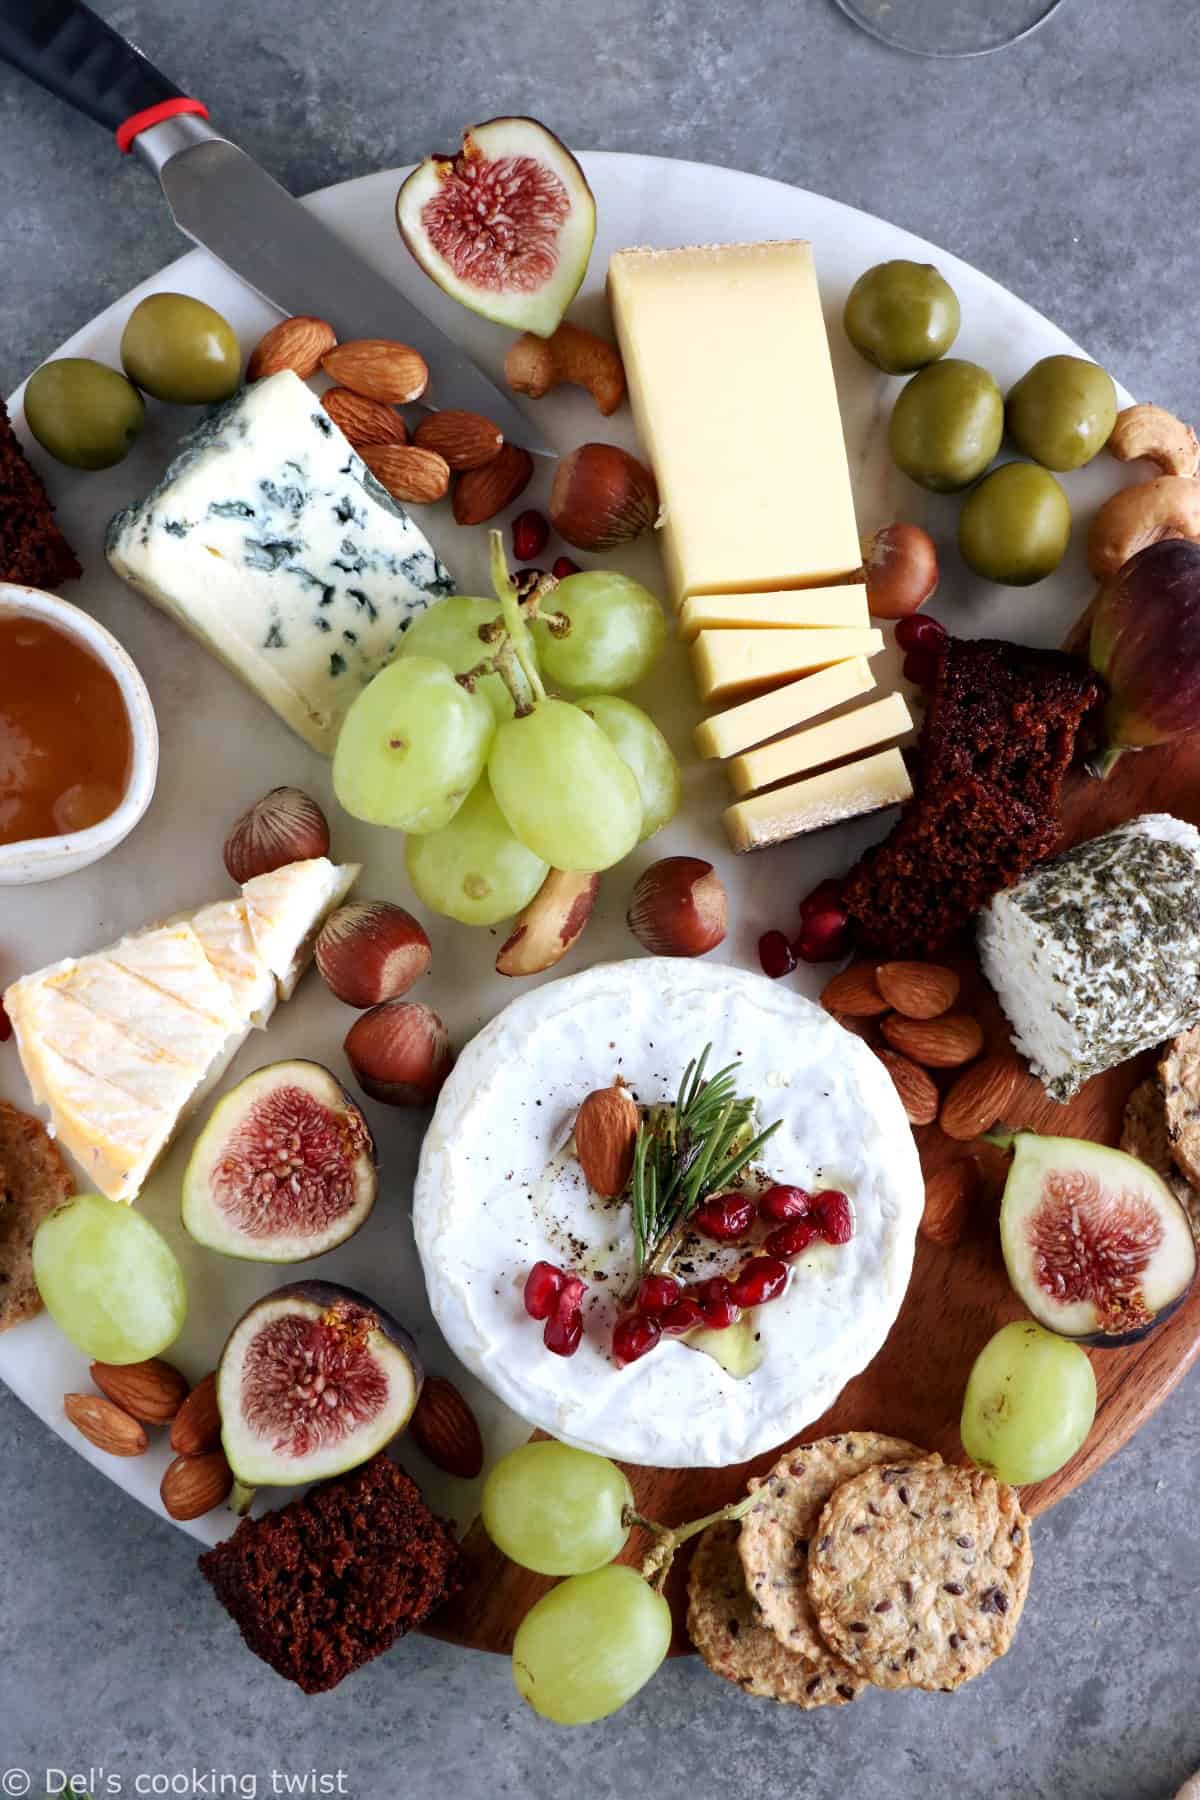 Best Cheese Board Cheese - My Favorite Cheeses for Cheese Boards